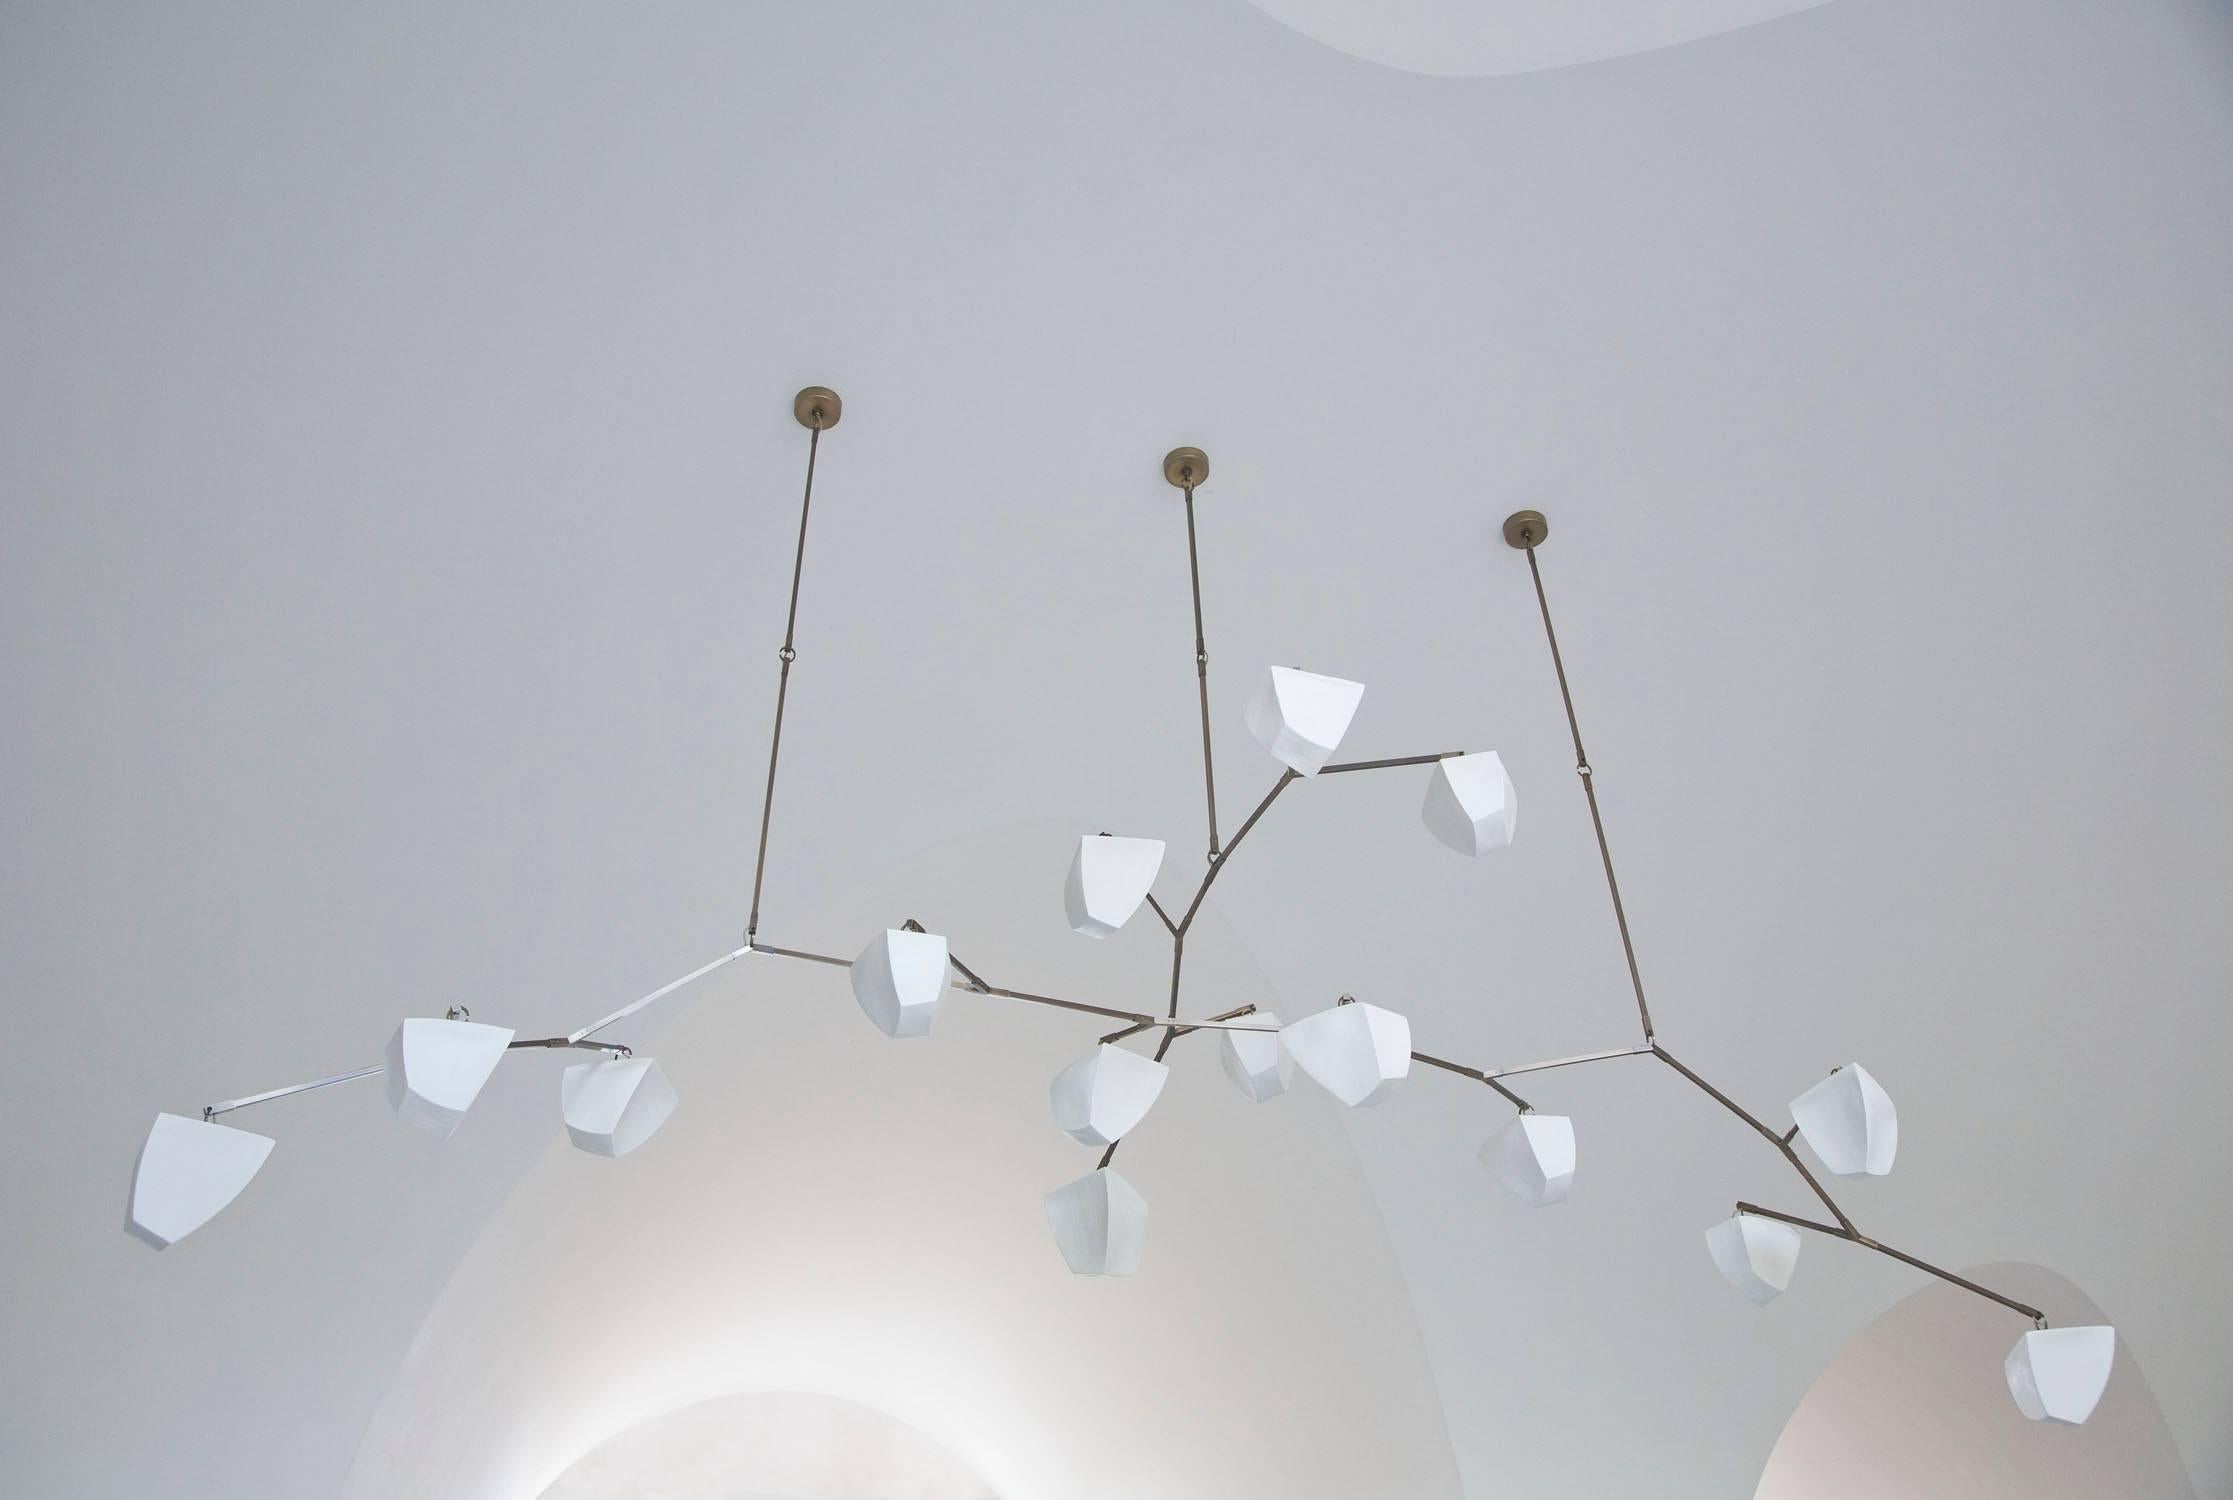 Cassiopeia 15: Porcelain is a show-stopping 3 stem Chandelier with 15 glowing hand-cast unglazed porcelain polyhedrons. Stunning in any setting, this classy piece of light-art offers charm, depth,  and warmth.

This fixture can be customized with